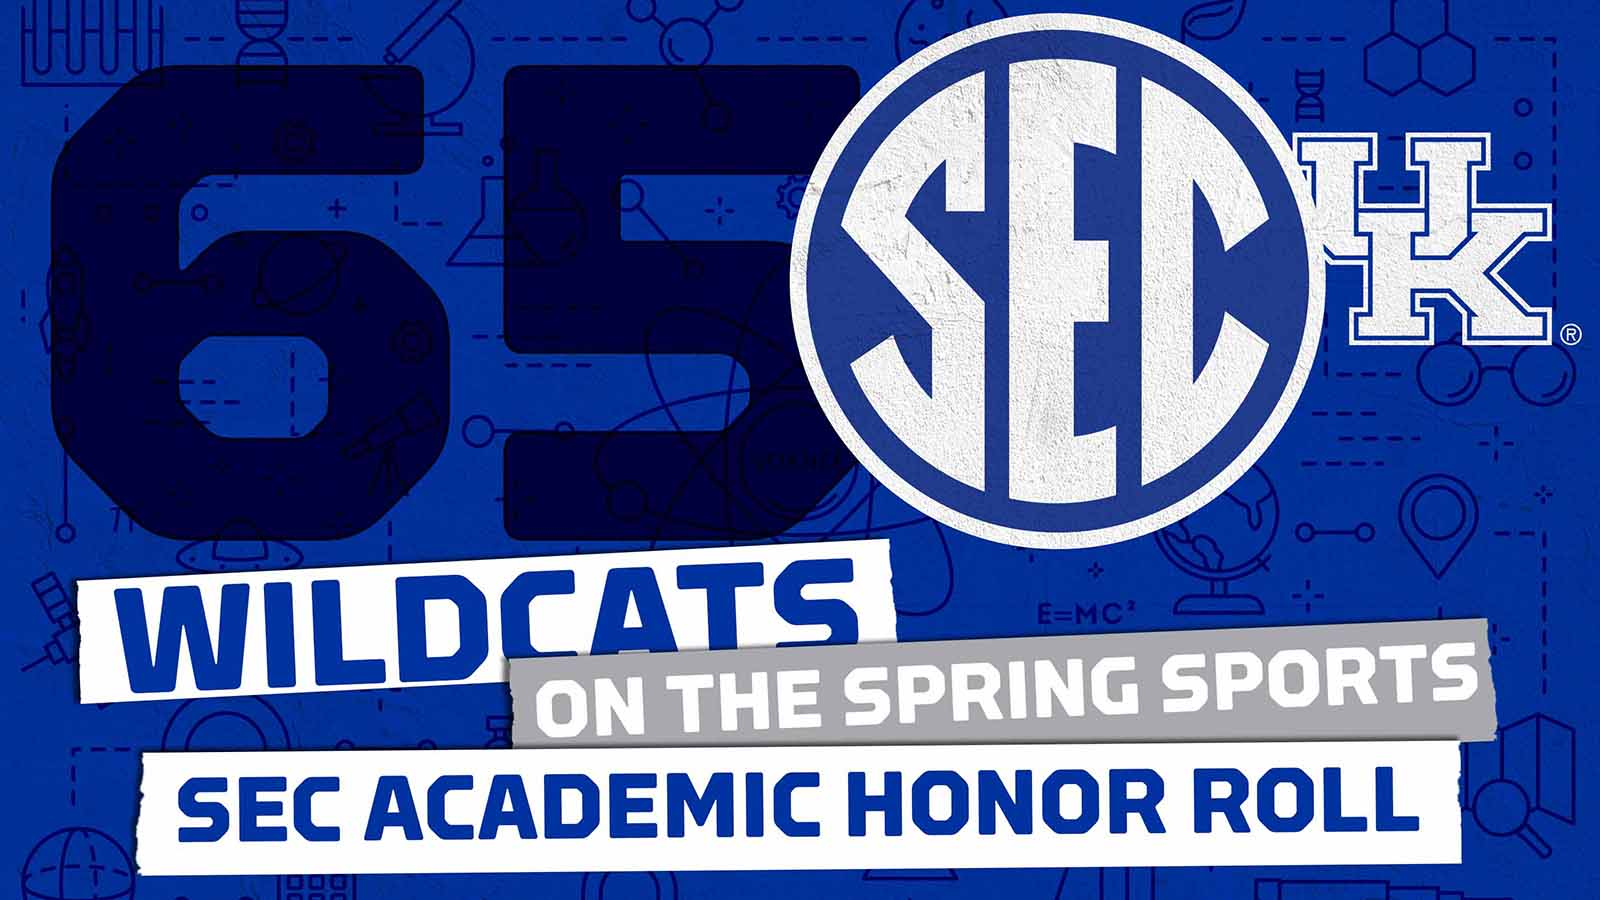 65 Wildcats on SEC Spring Academic Honor Roll